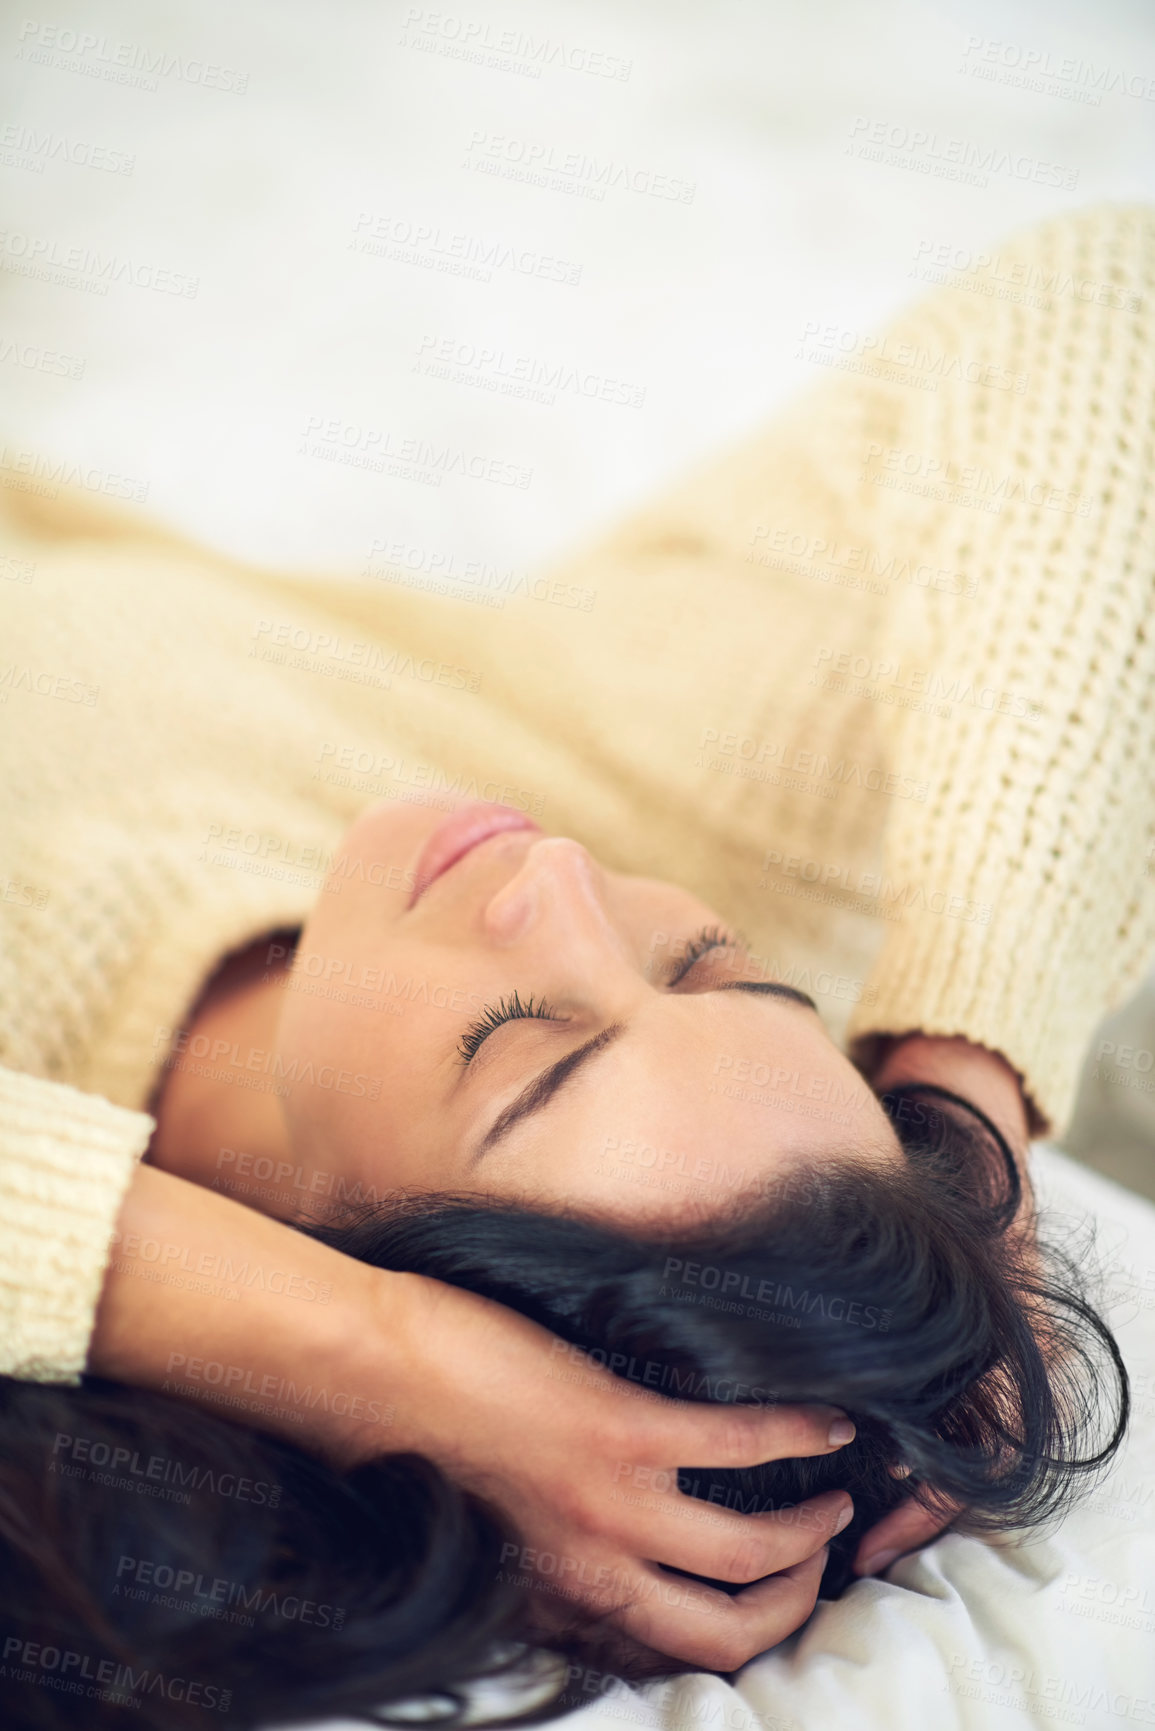 Buy stock photo Cropped shot of a young woman sleeping on her bed